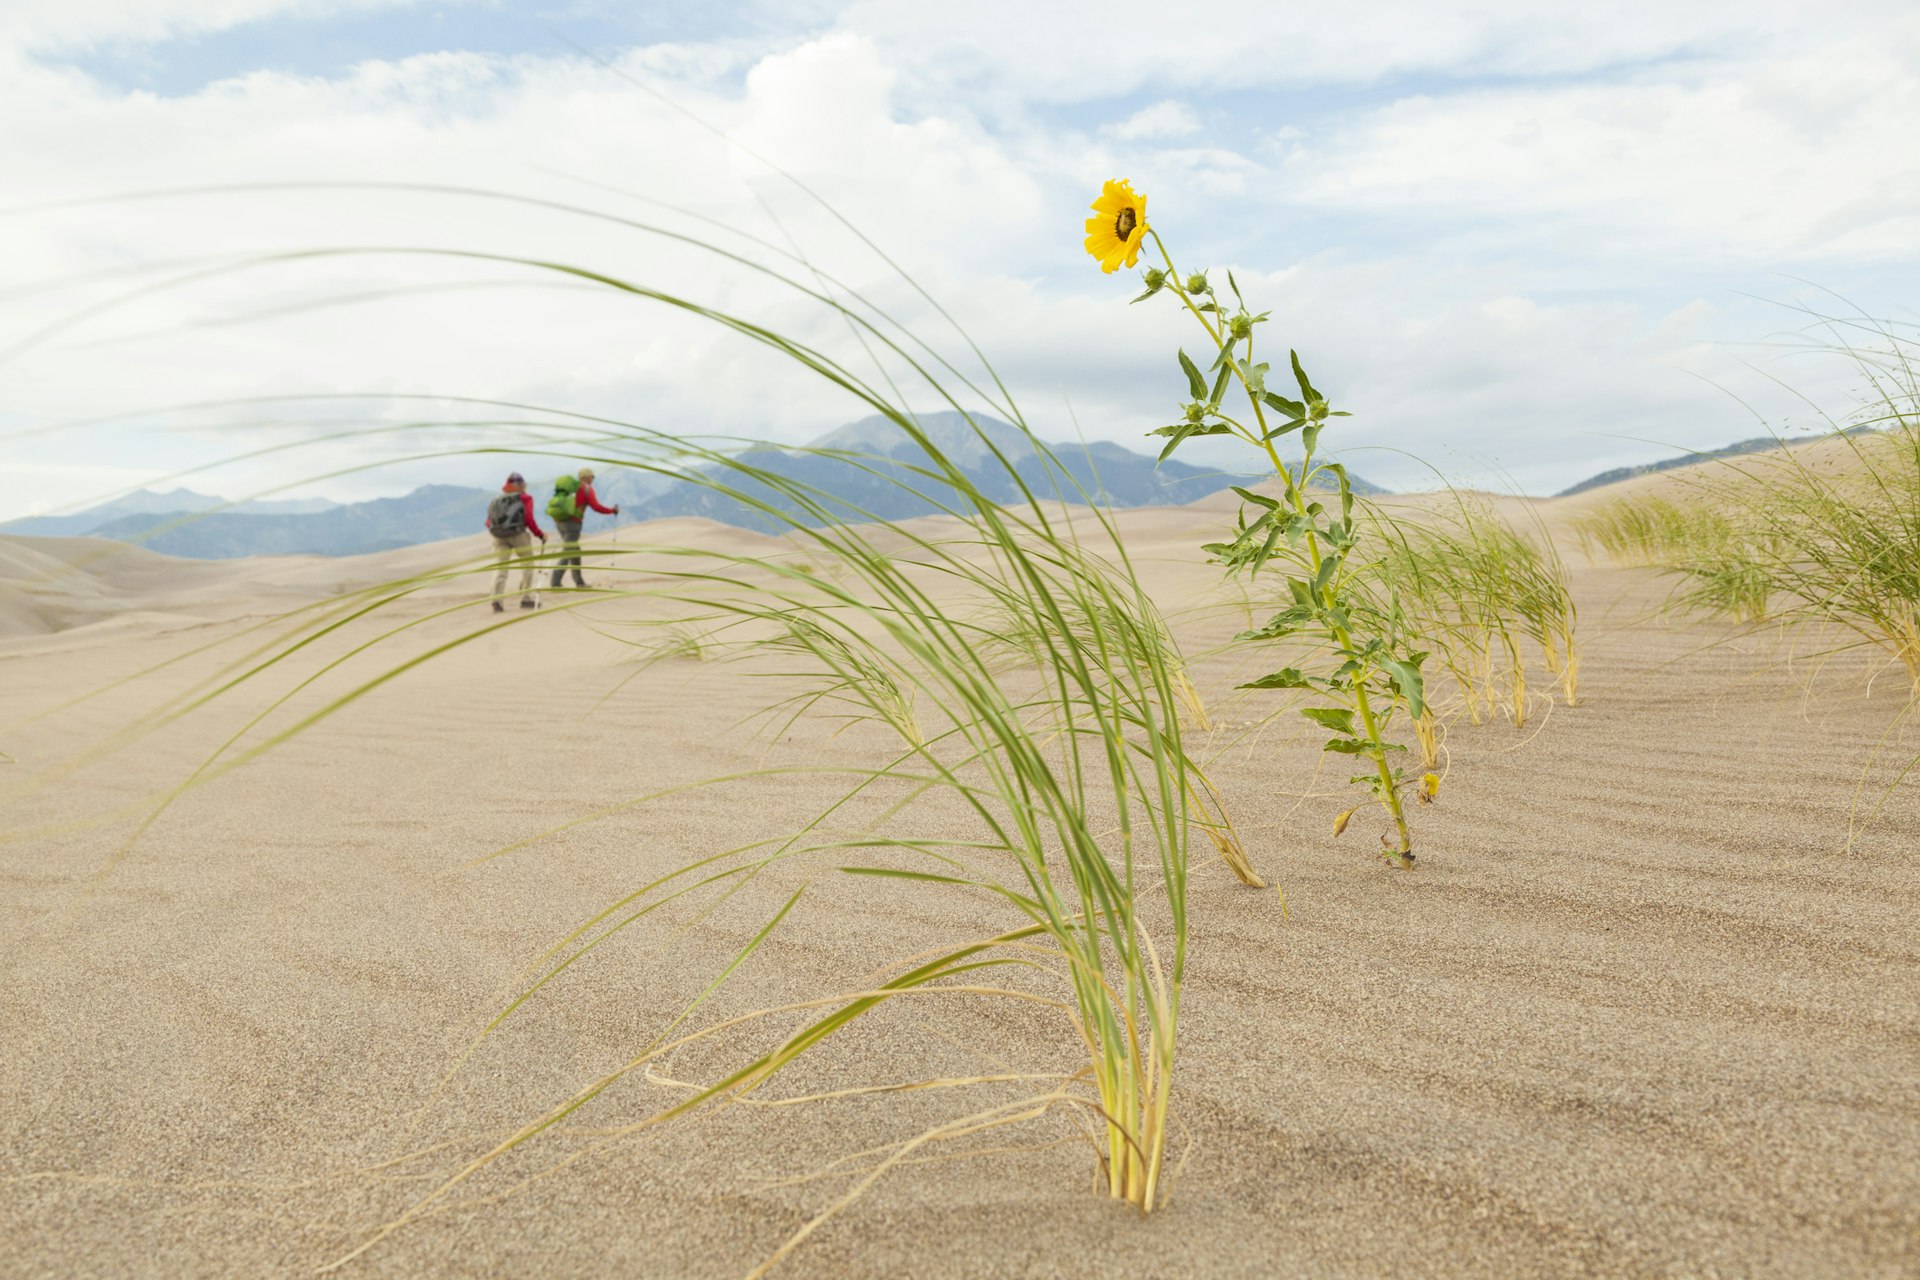 Blowout grass and a prairie sunflower peek out of a sand dune in Great Sand Dunes National Park, Colorado